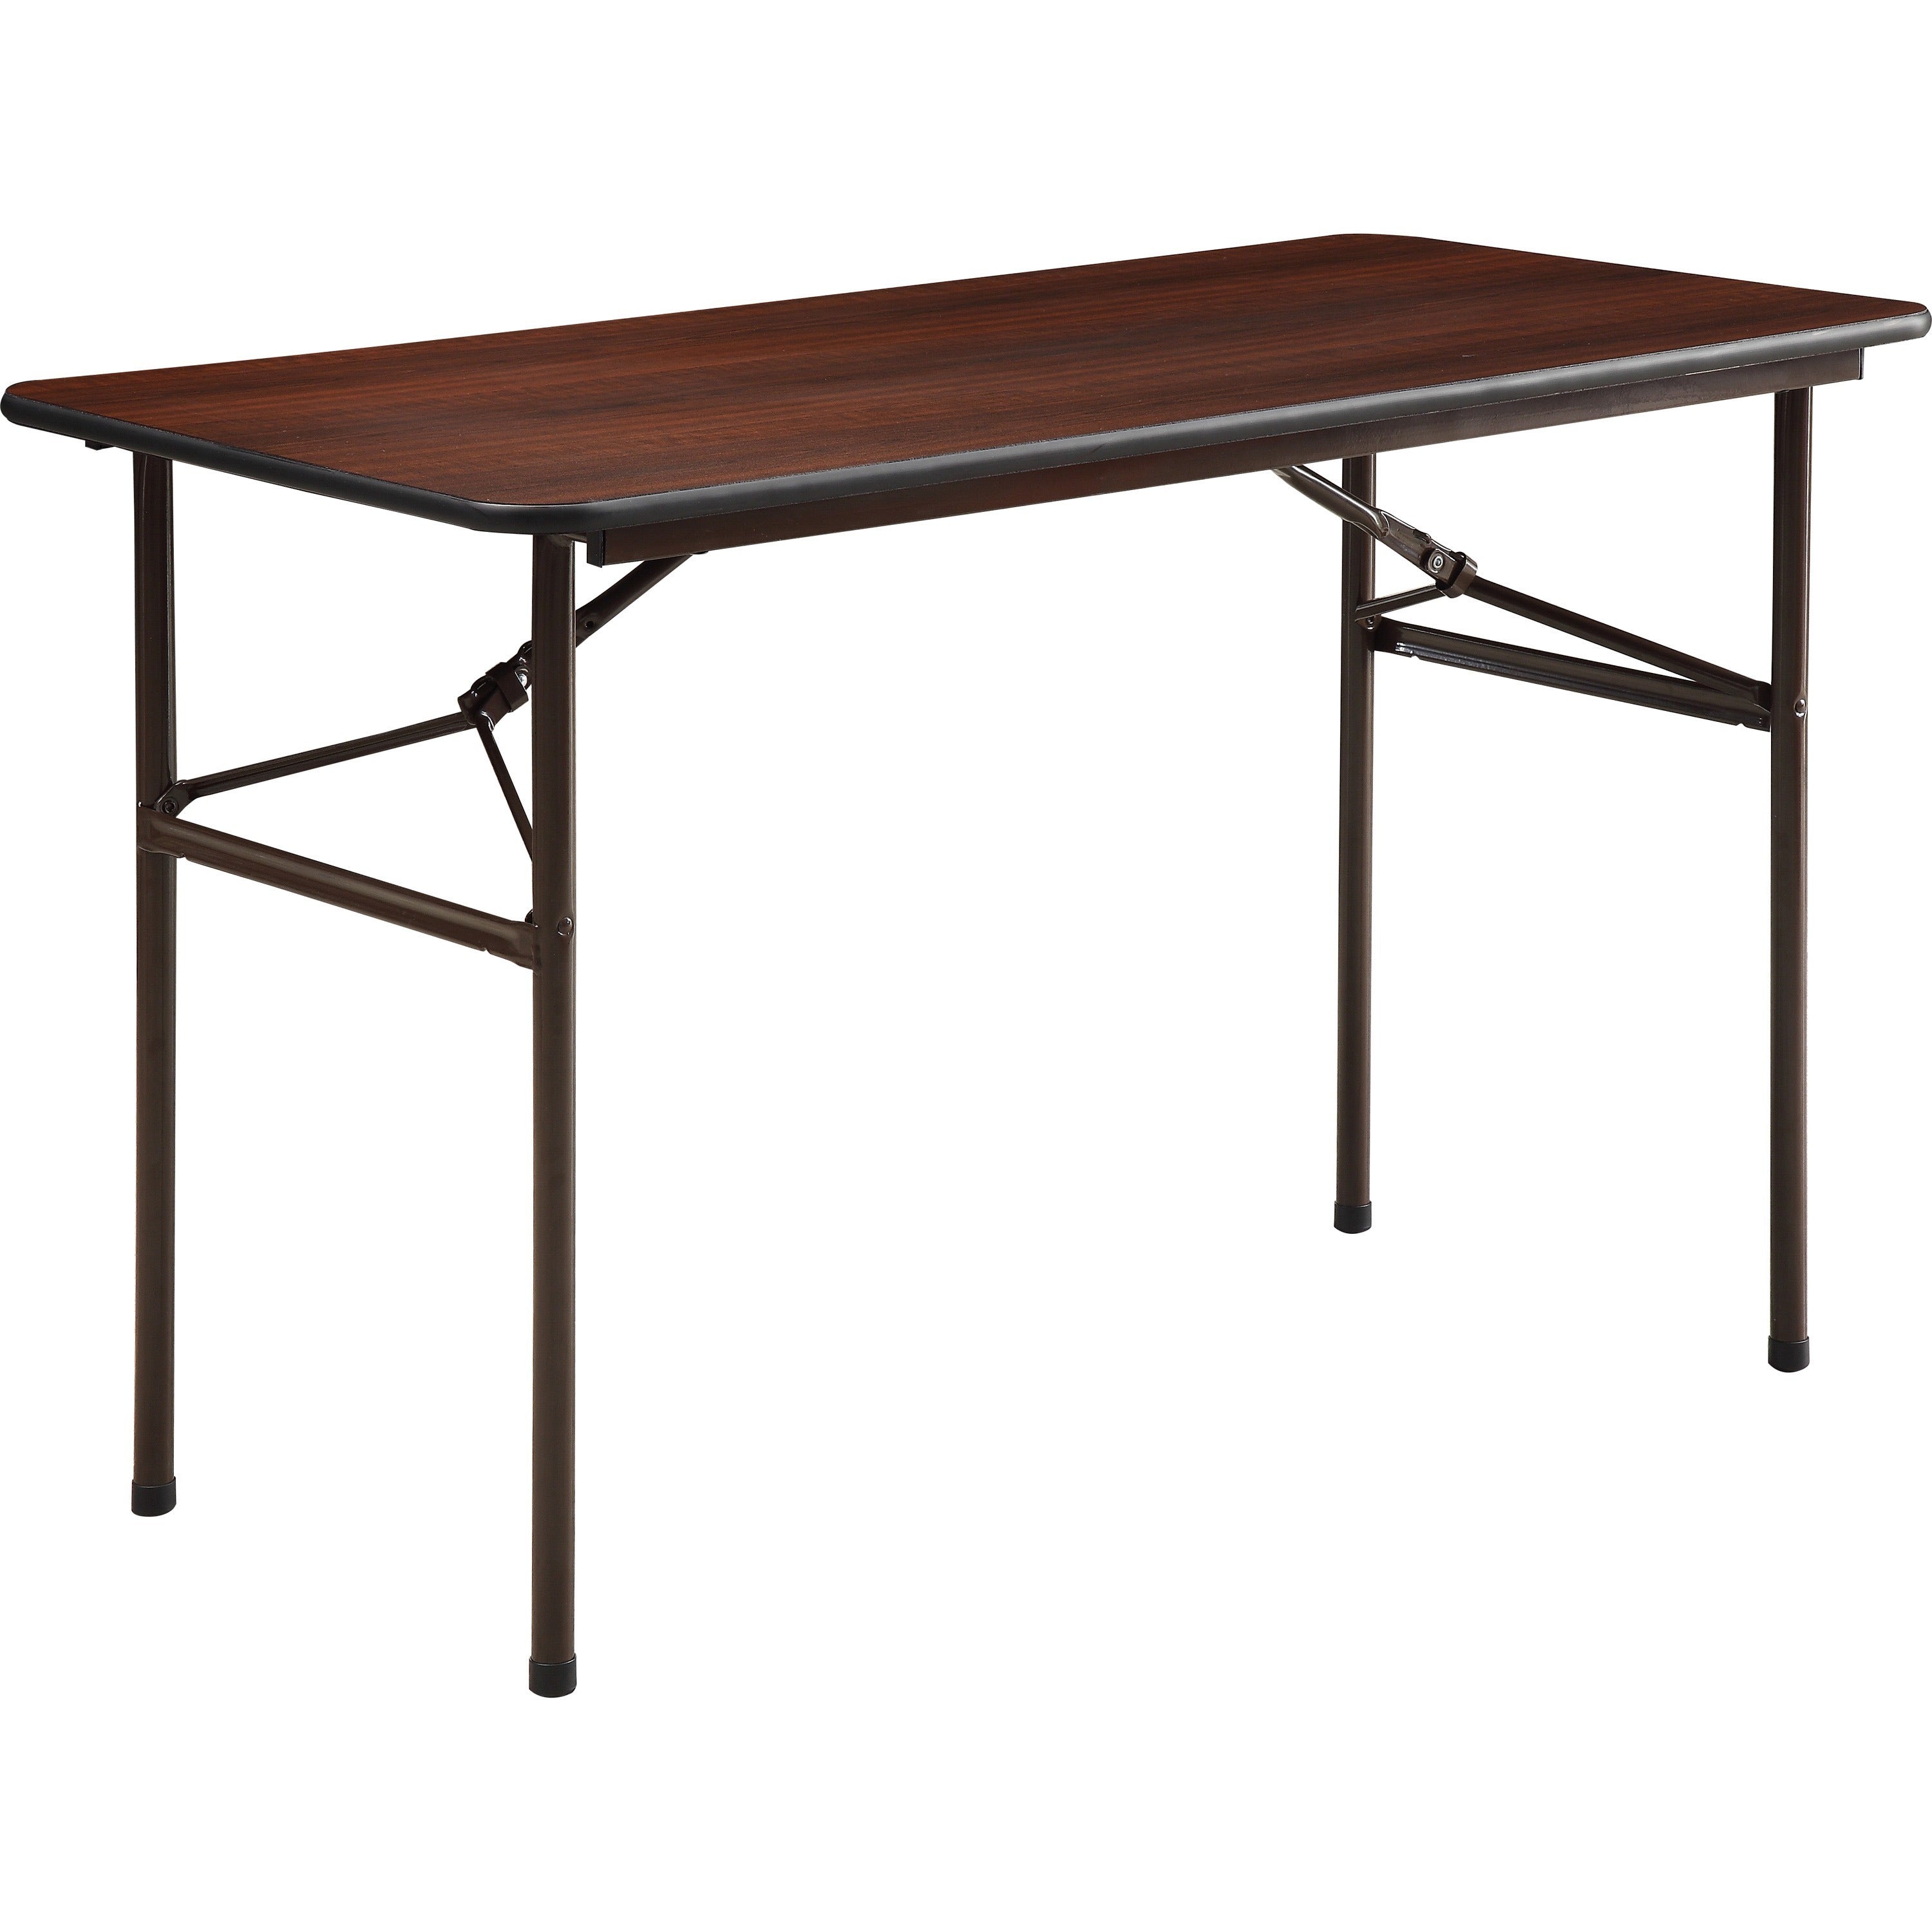 Lorell Economy Folding Table - For - Table TopMelamine Rectangle Top - 500 lb Capacity - 48" Table Top Length x 24" Table Top Width x 0.63" Table Top Thickness - 29" Height - Mahogany - 1 Each - 